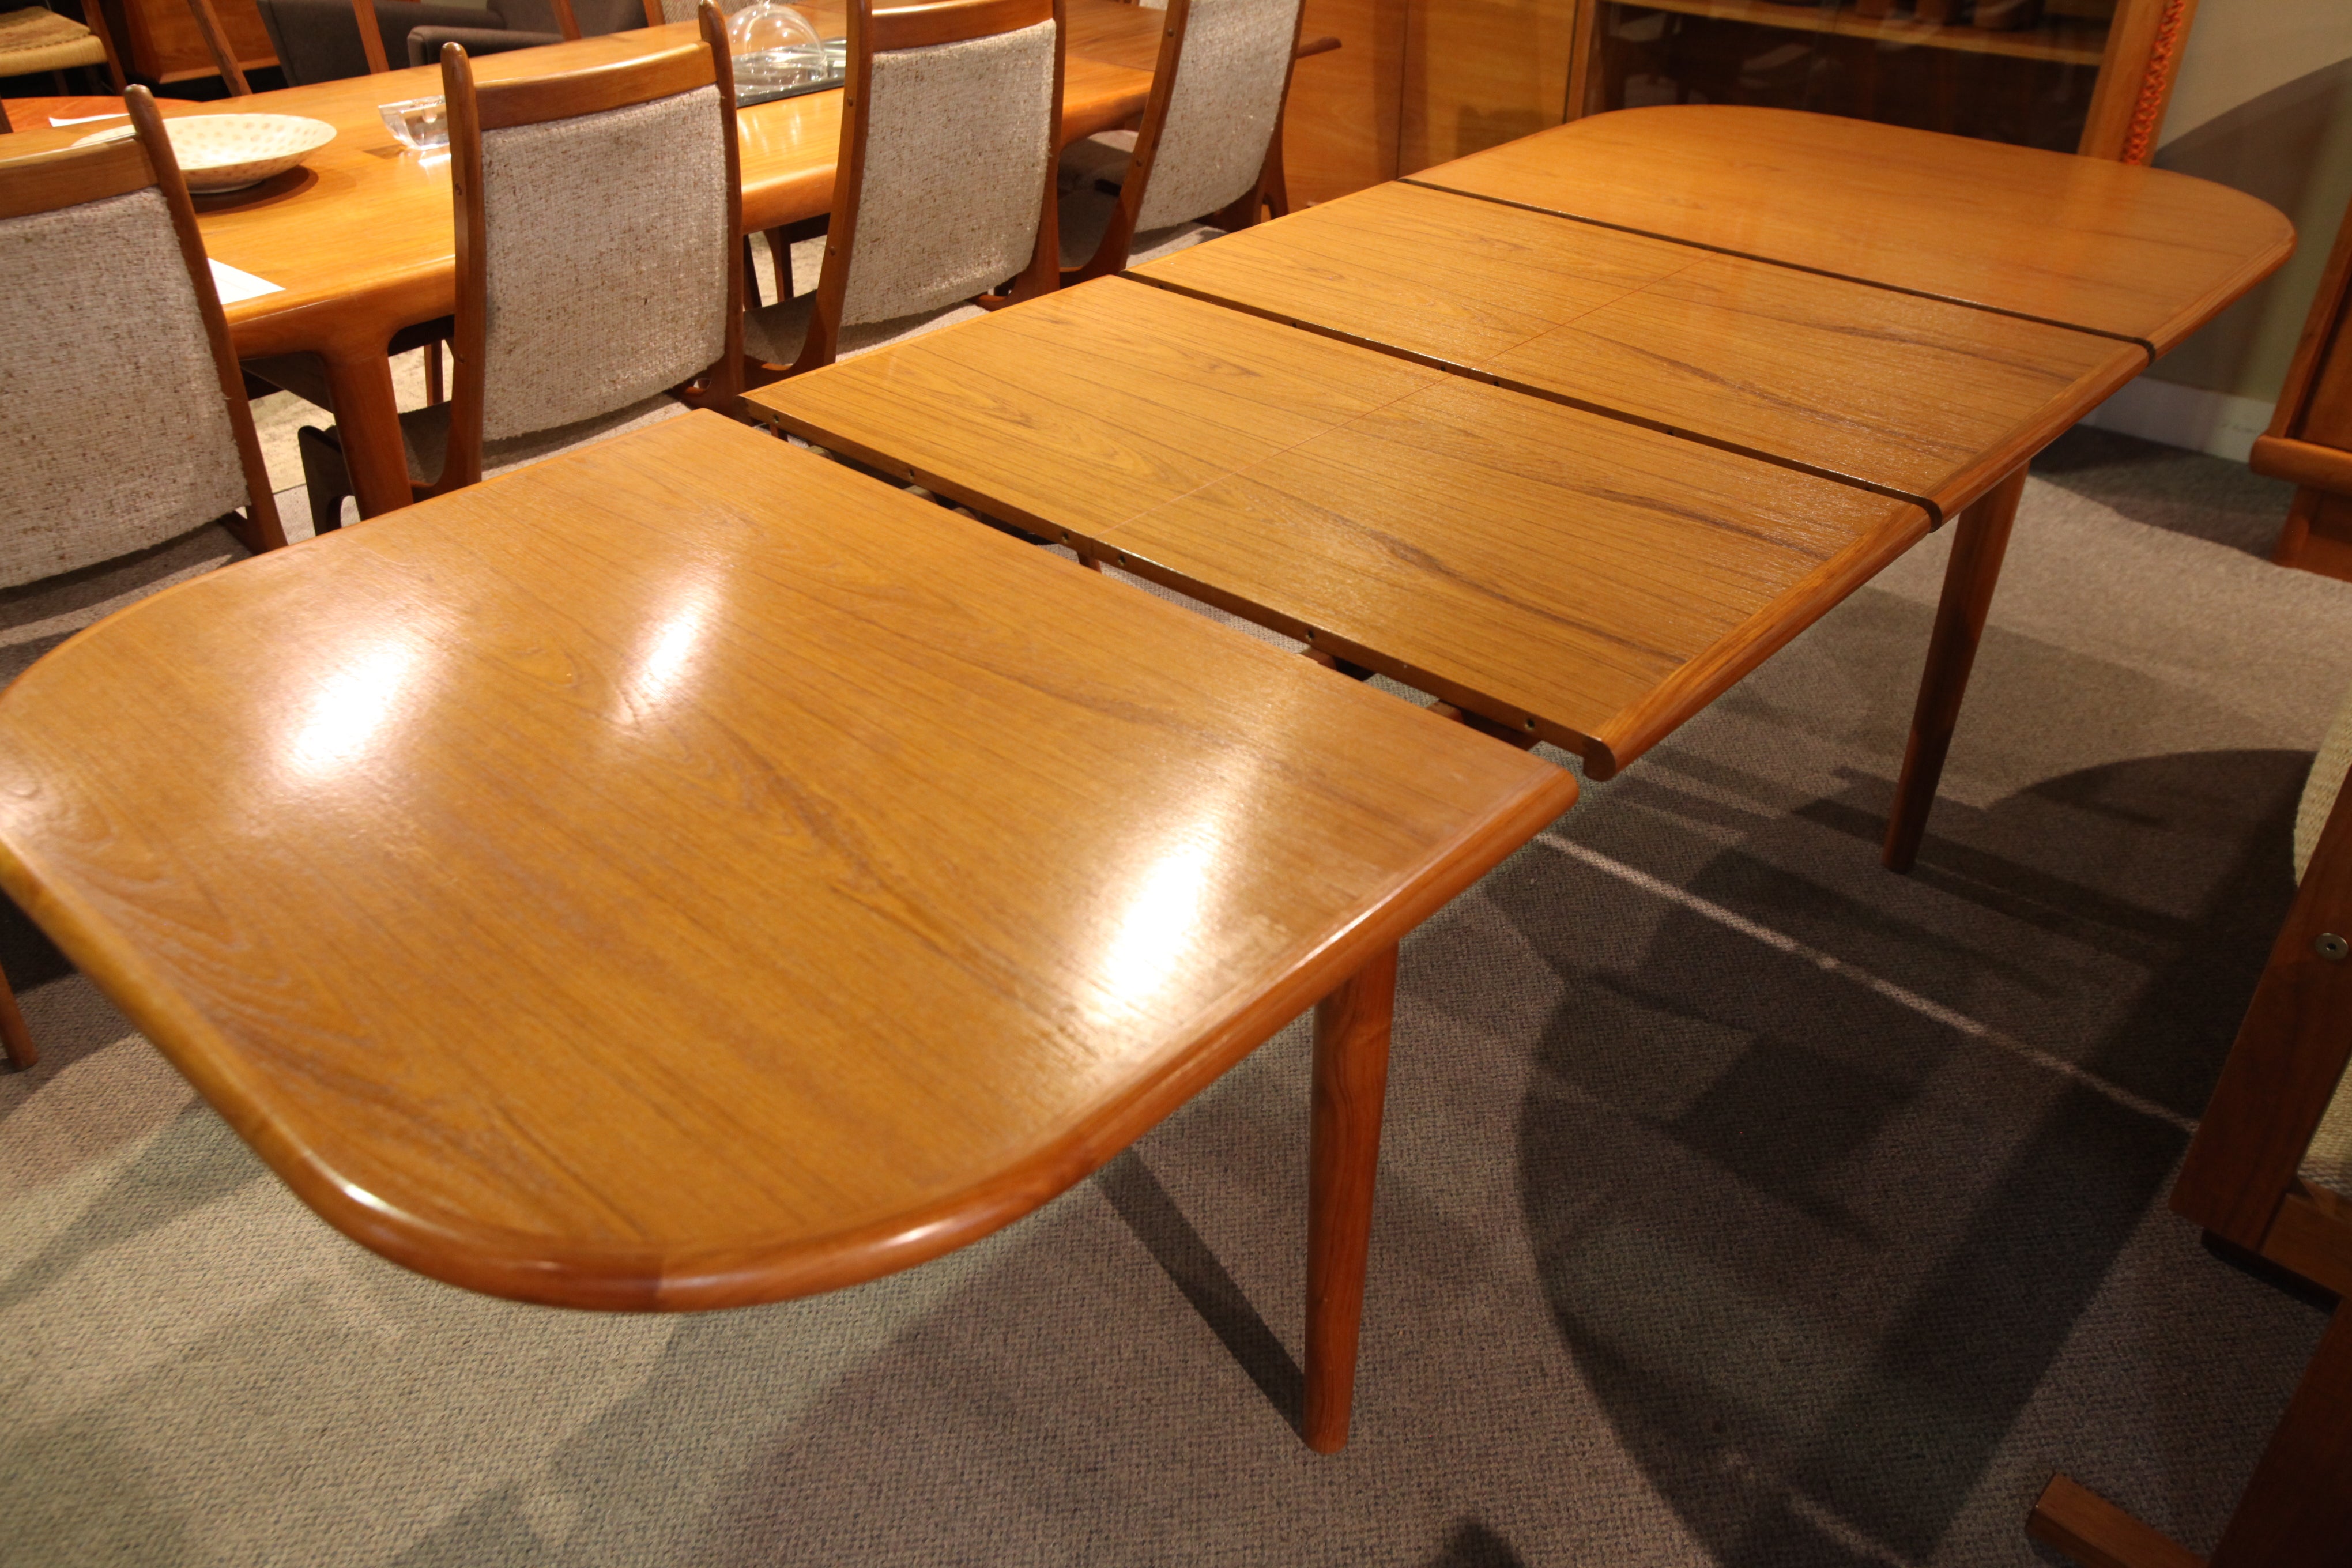 Vintage D-Scan Teak Dining Table w/ Double Butterfly Leafs (97.5"x38") (57"x38")